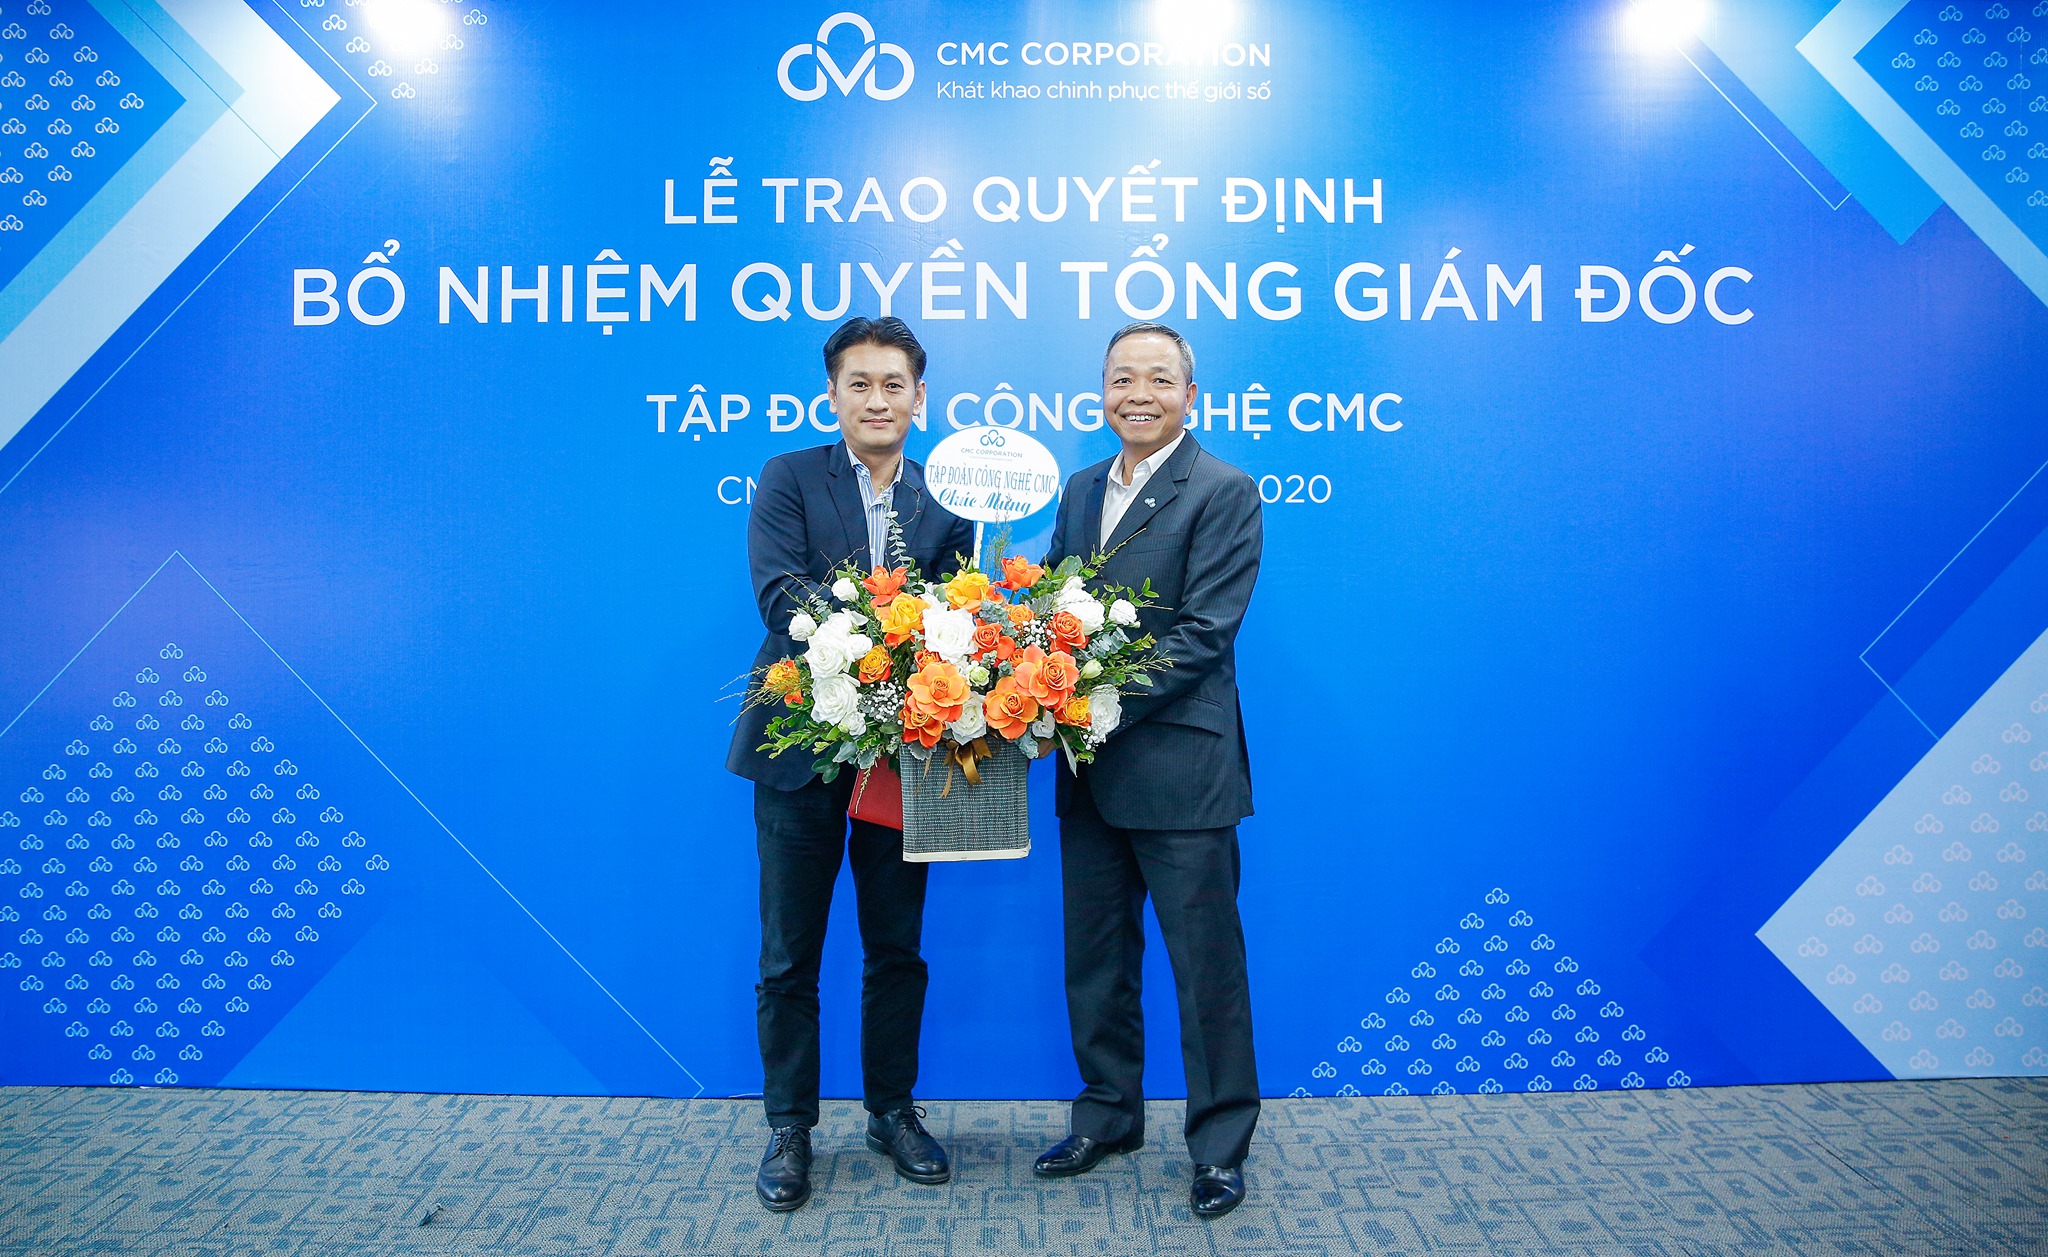 CMC Corporation appoints Acting General Director